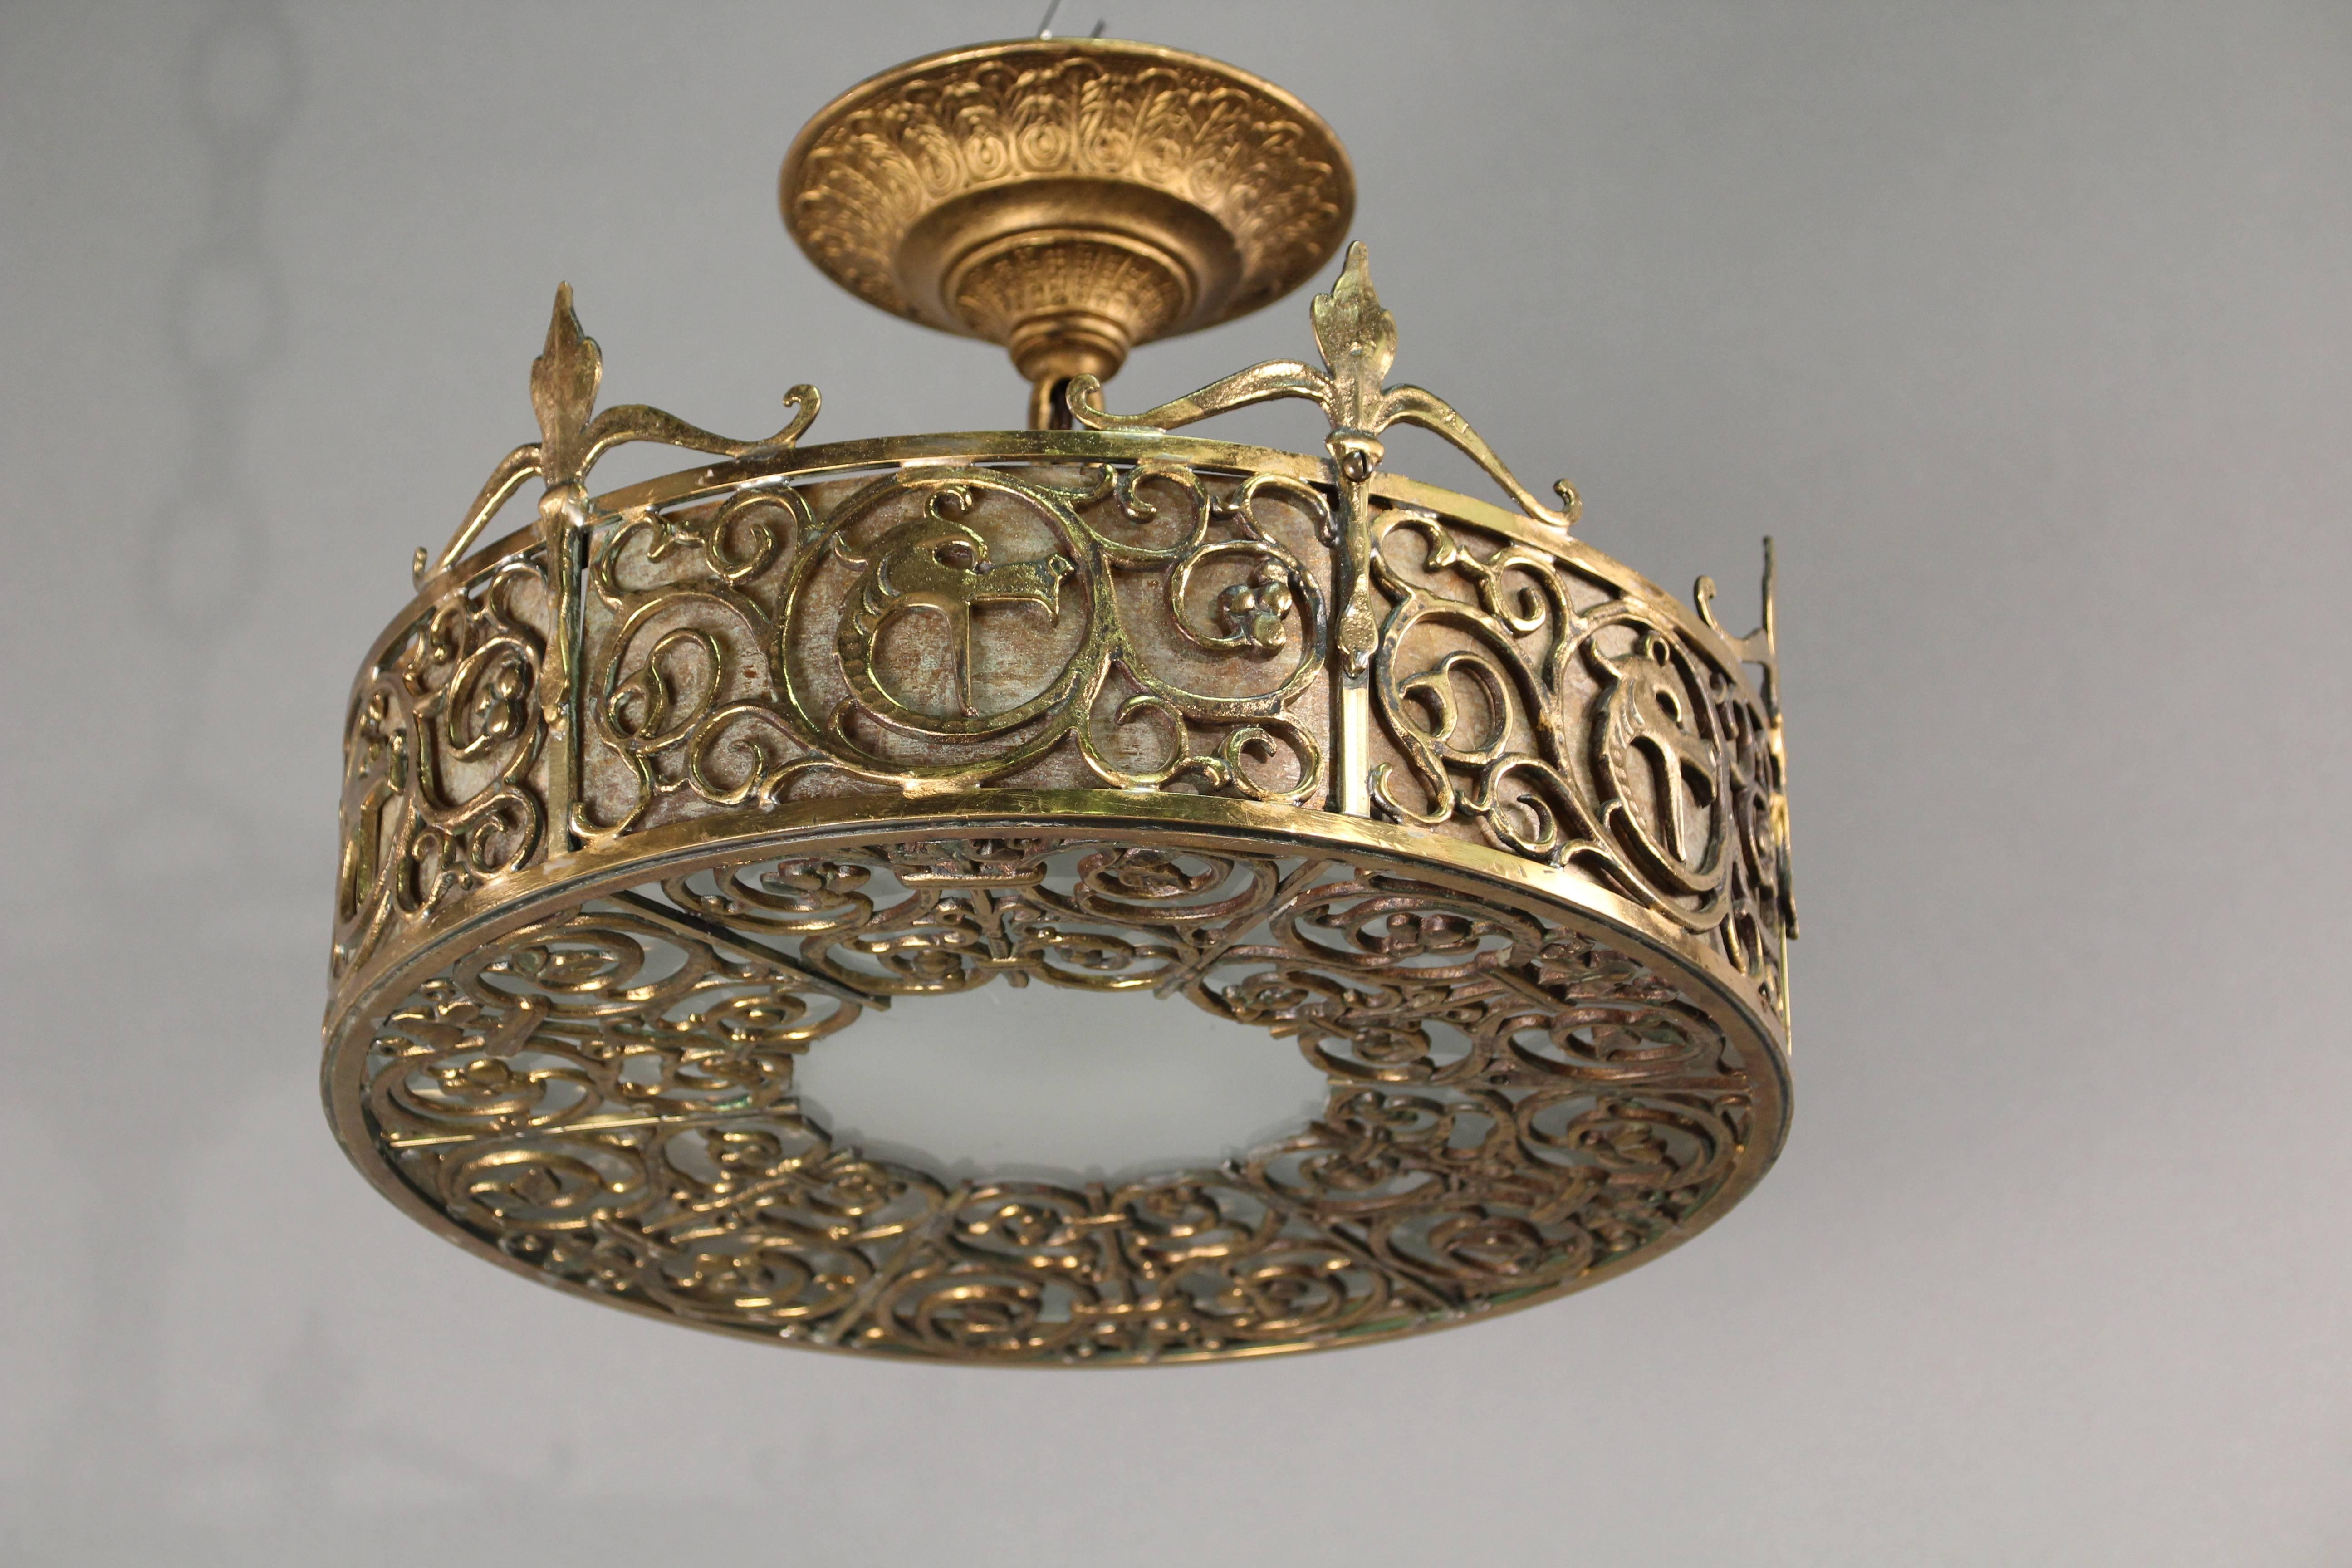 Bronze ceiling mount attributed to Oscar Bach with dragon heads, circa 1920s. Bronze, glass and mica.